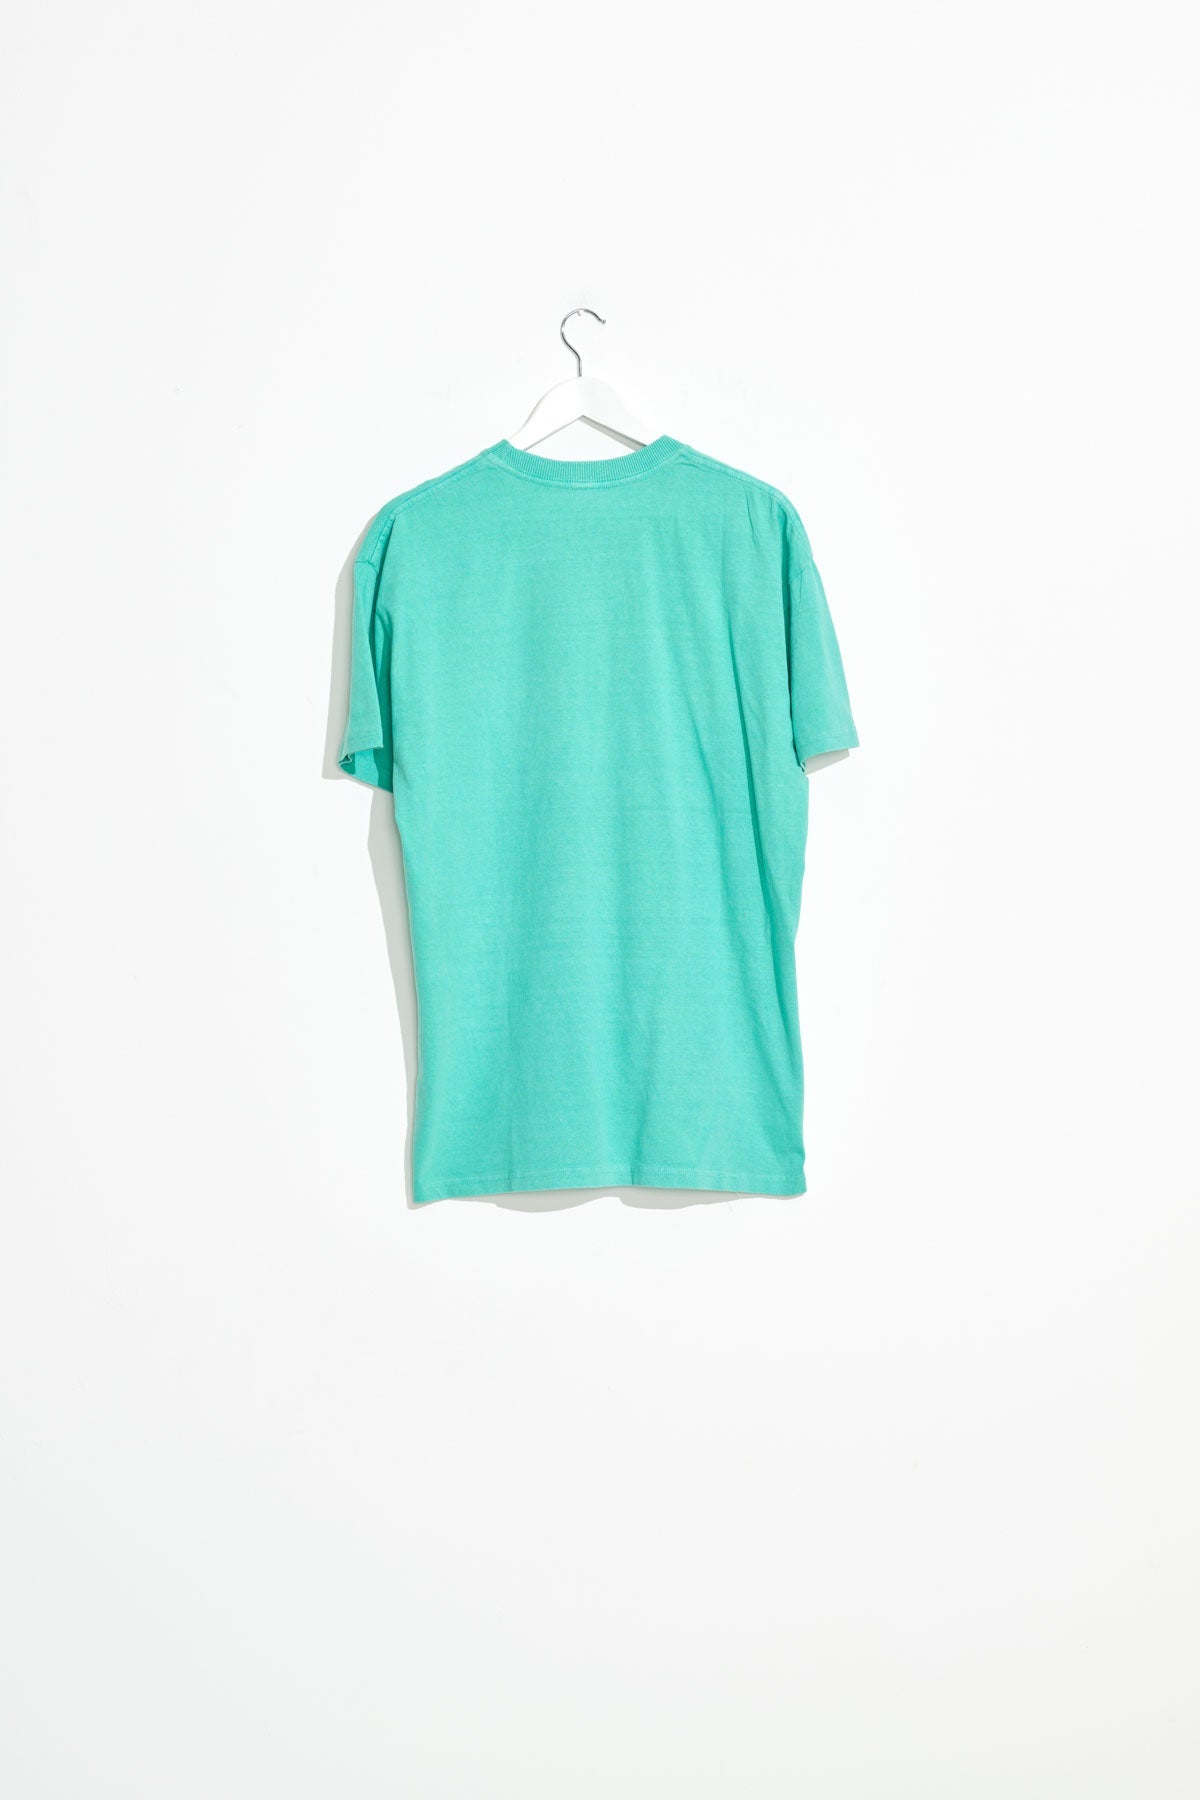 Misfit Shapes - Journey Well 50-50 Aaa SS Tee - Pigment Turquoise